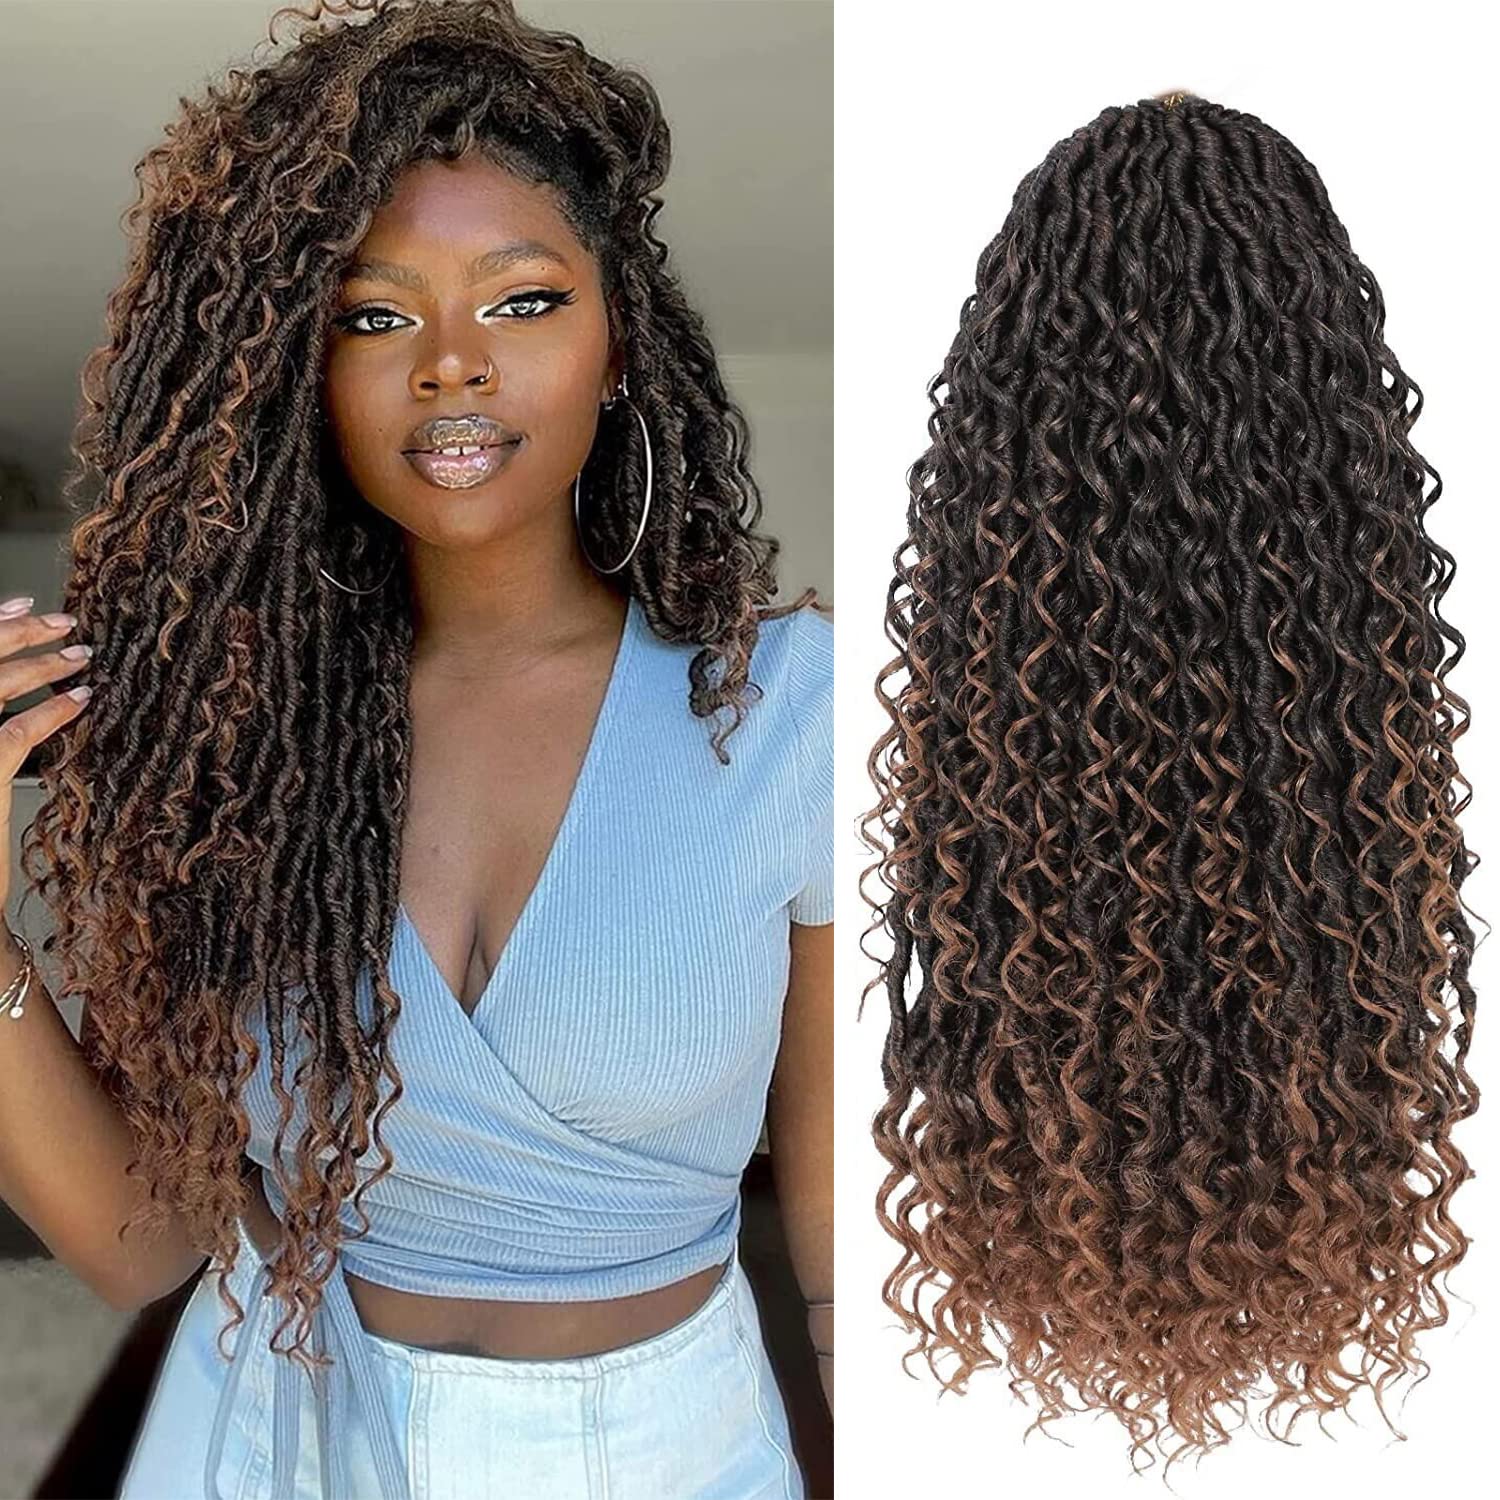 New Goddess Locs Wavy Faux Locs Crochet Hair With loose wavy ends